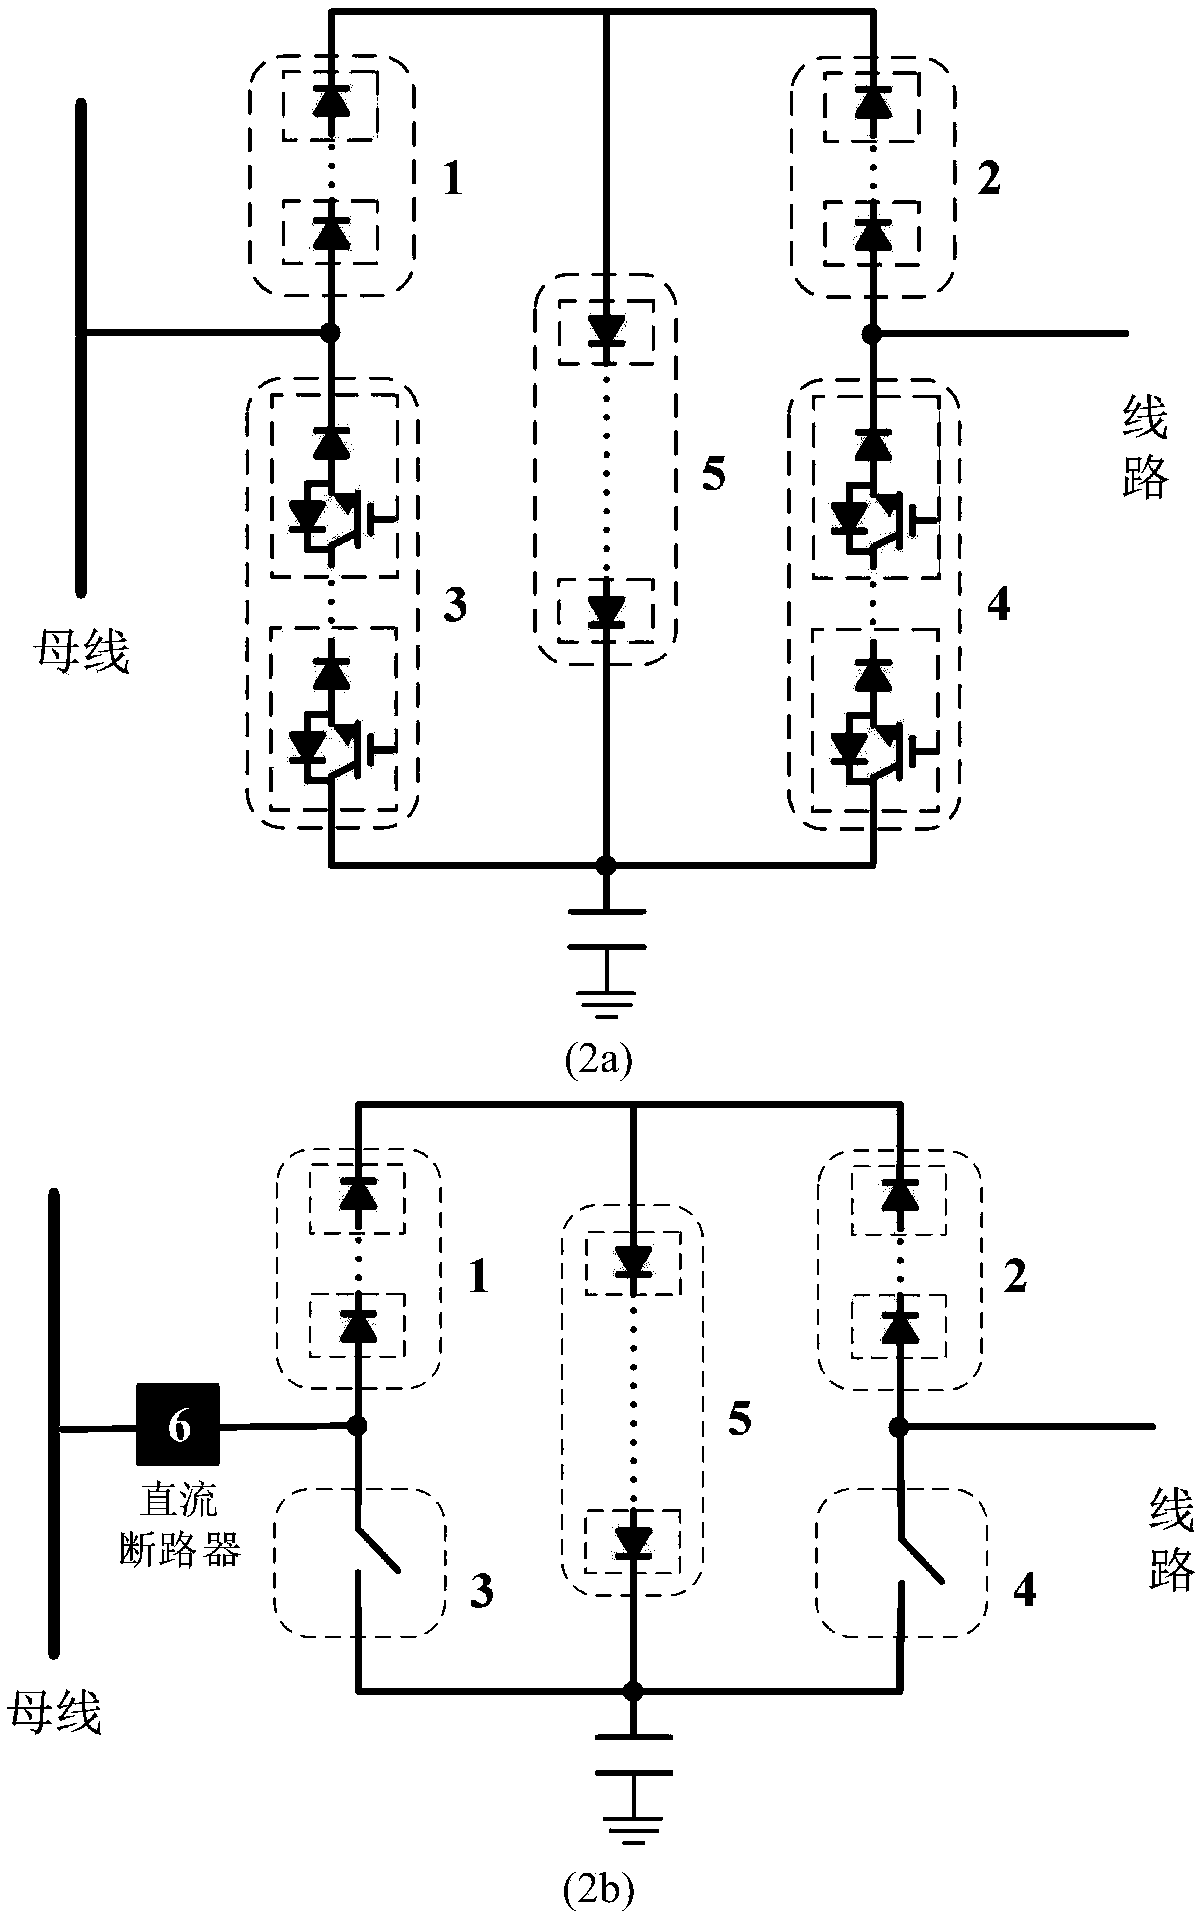 Current limiting equipment applicable to bidirectional flow direct current system distributed capacitance configuration